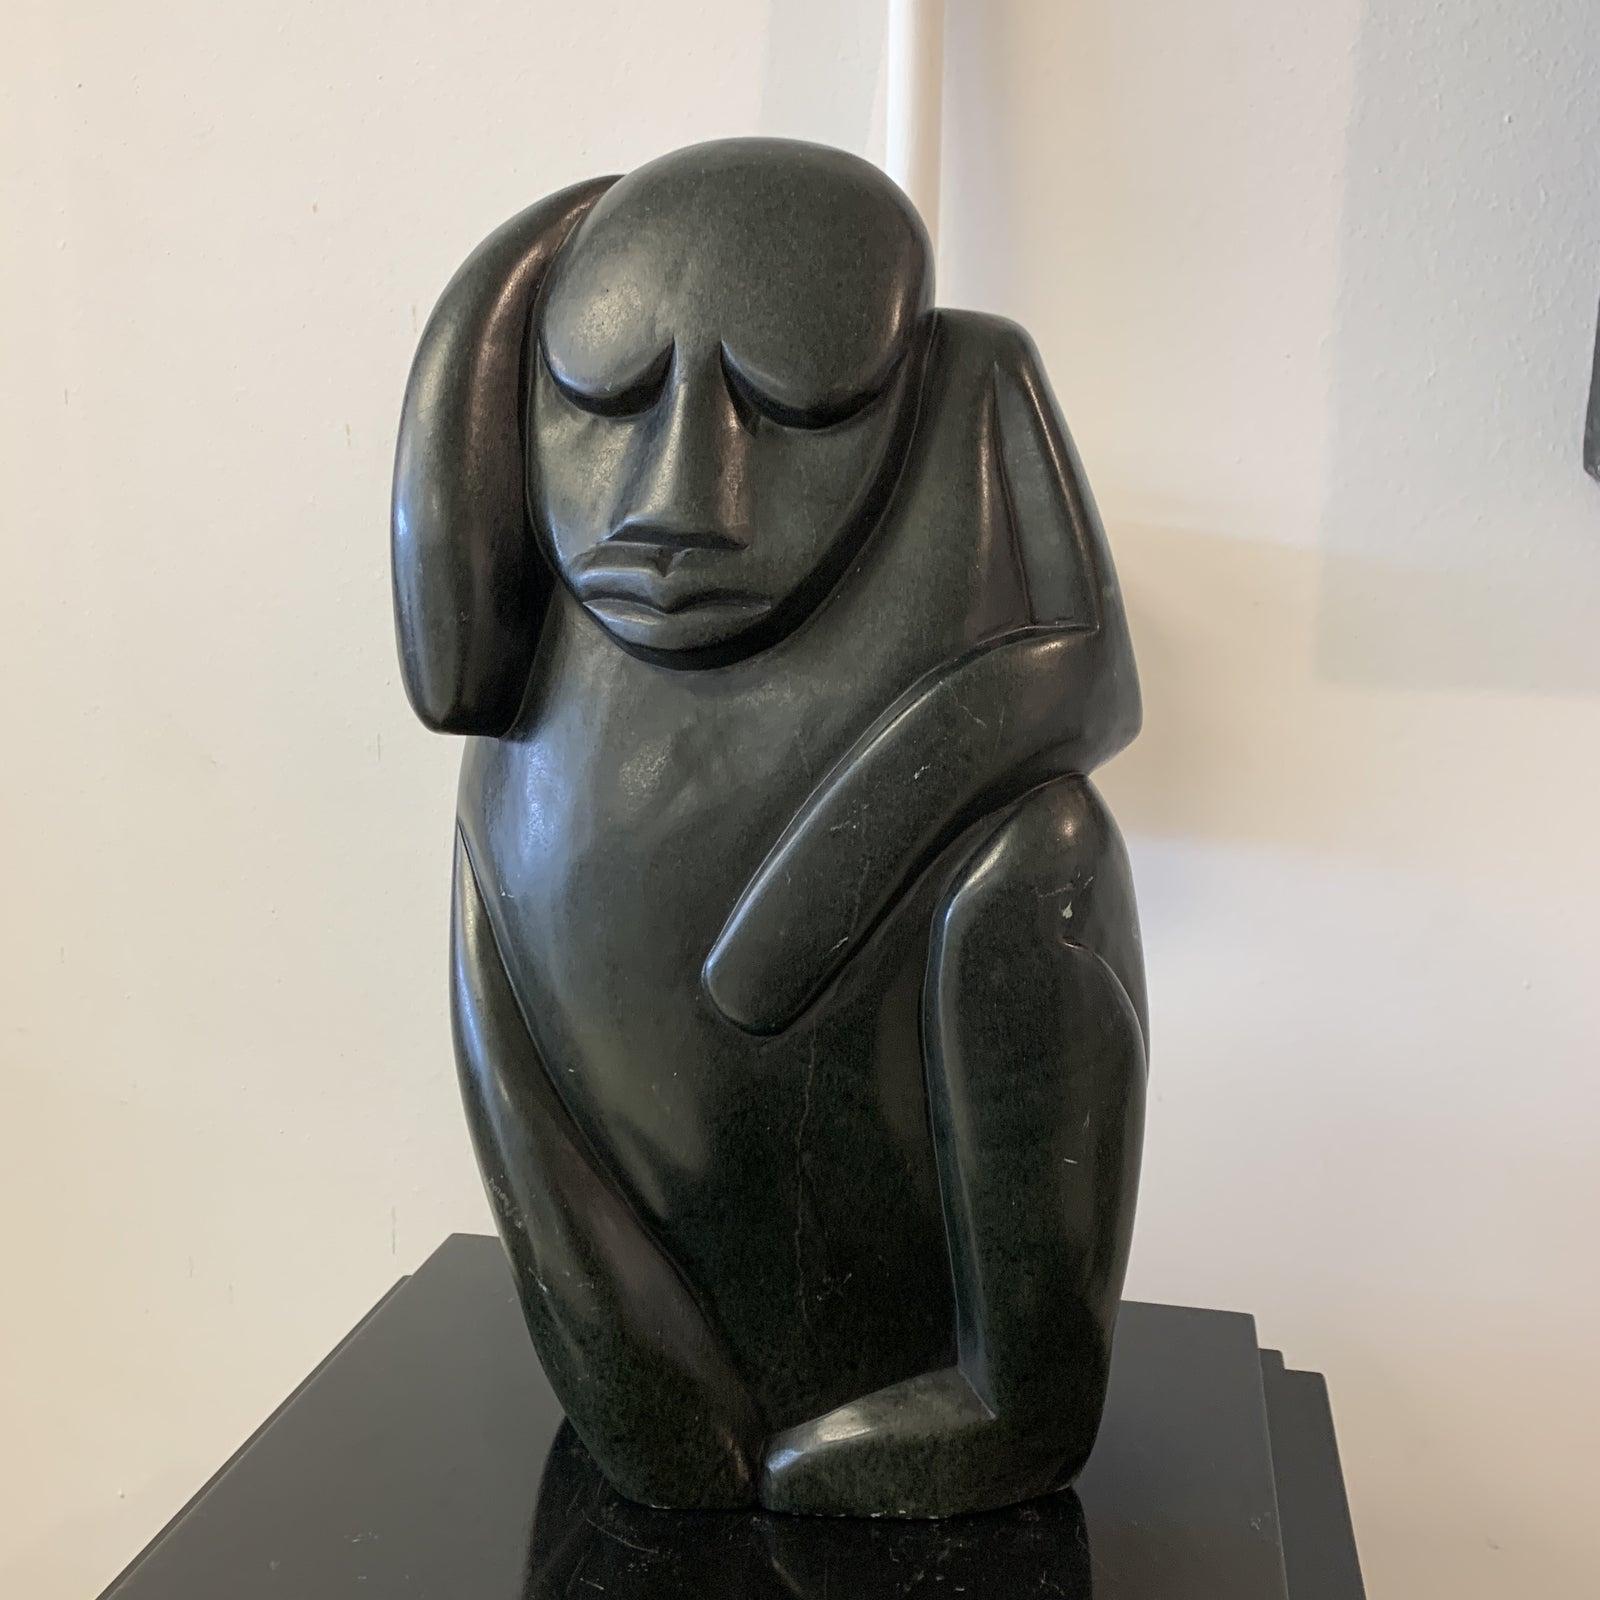 Peter Mandala signed Zimbabwean carved verdite stone sculpture. CONDITION: Areas with minor wear & scratches.
Peter Mandala (b. 1951) developed a distinctive style depicting a vast range of human expressions. He works primarily in Serpentine or